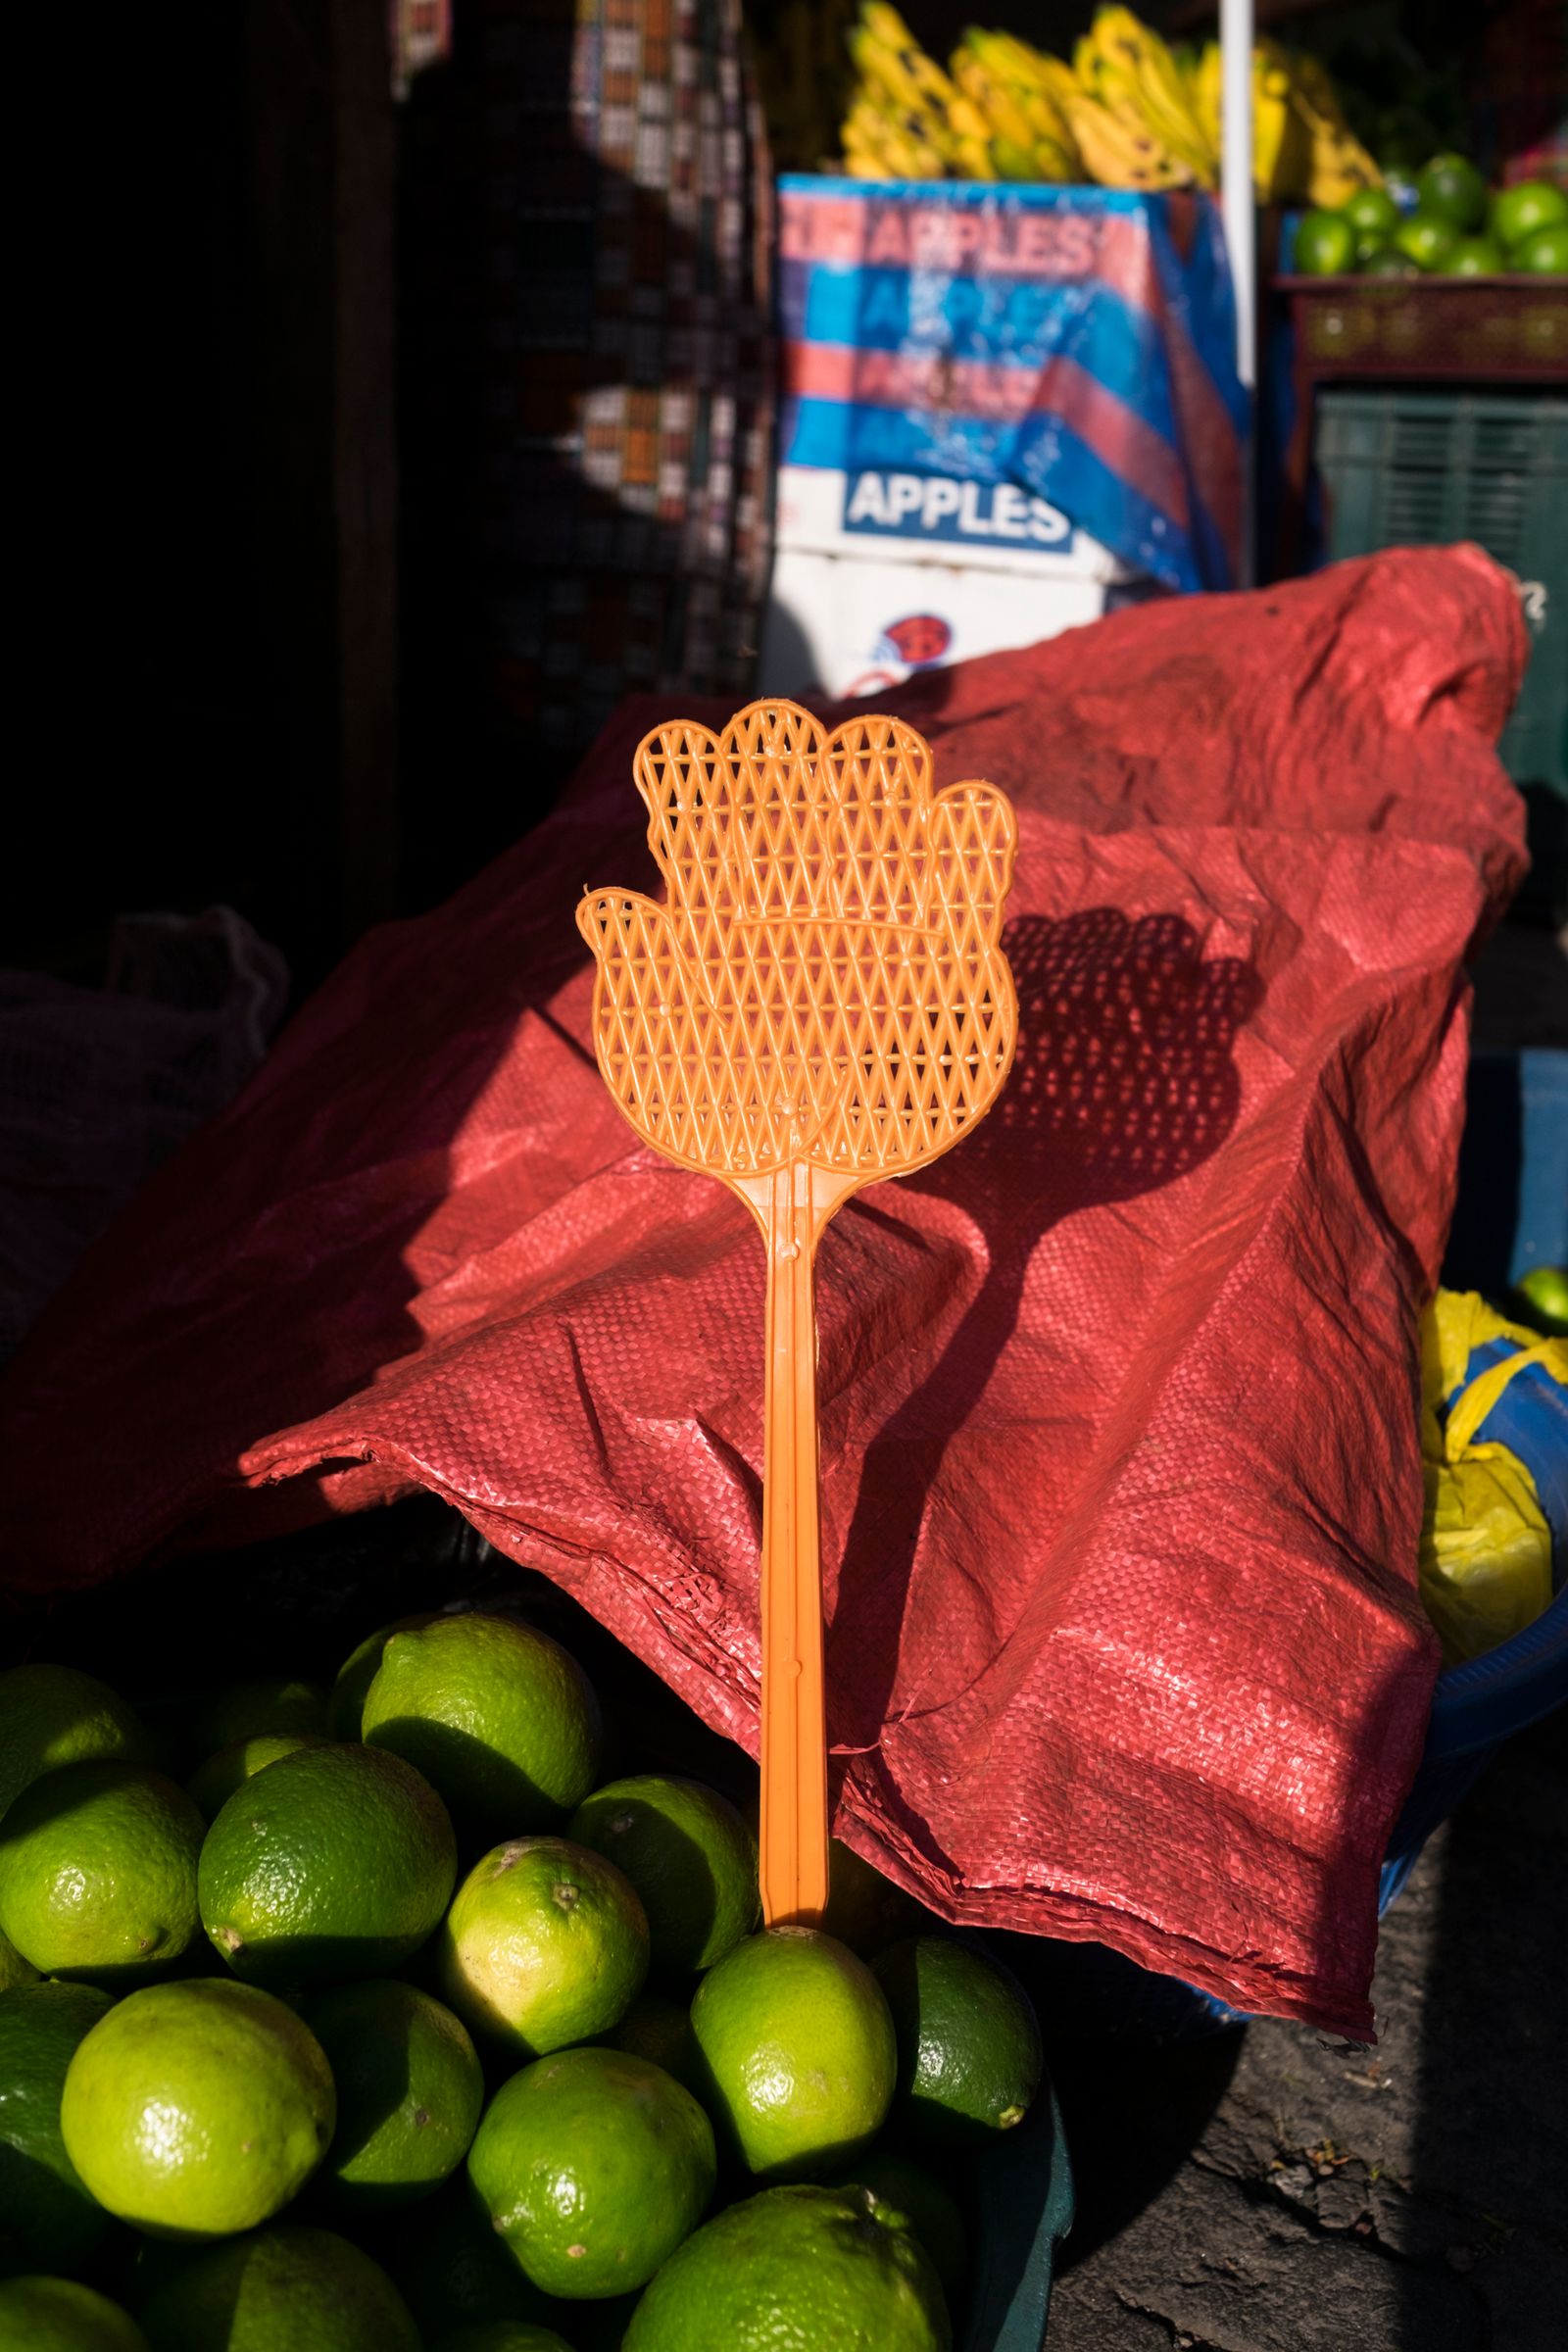 © Cris Veit - Artifact used by vendors to scare away flies at street markets